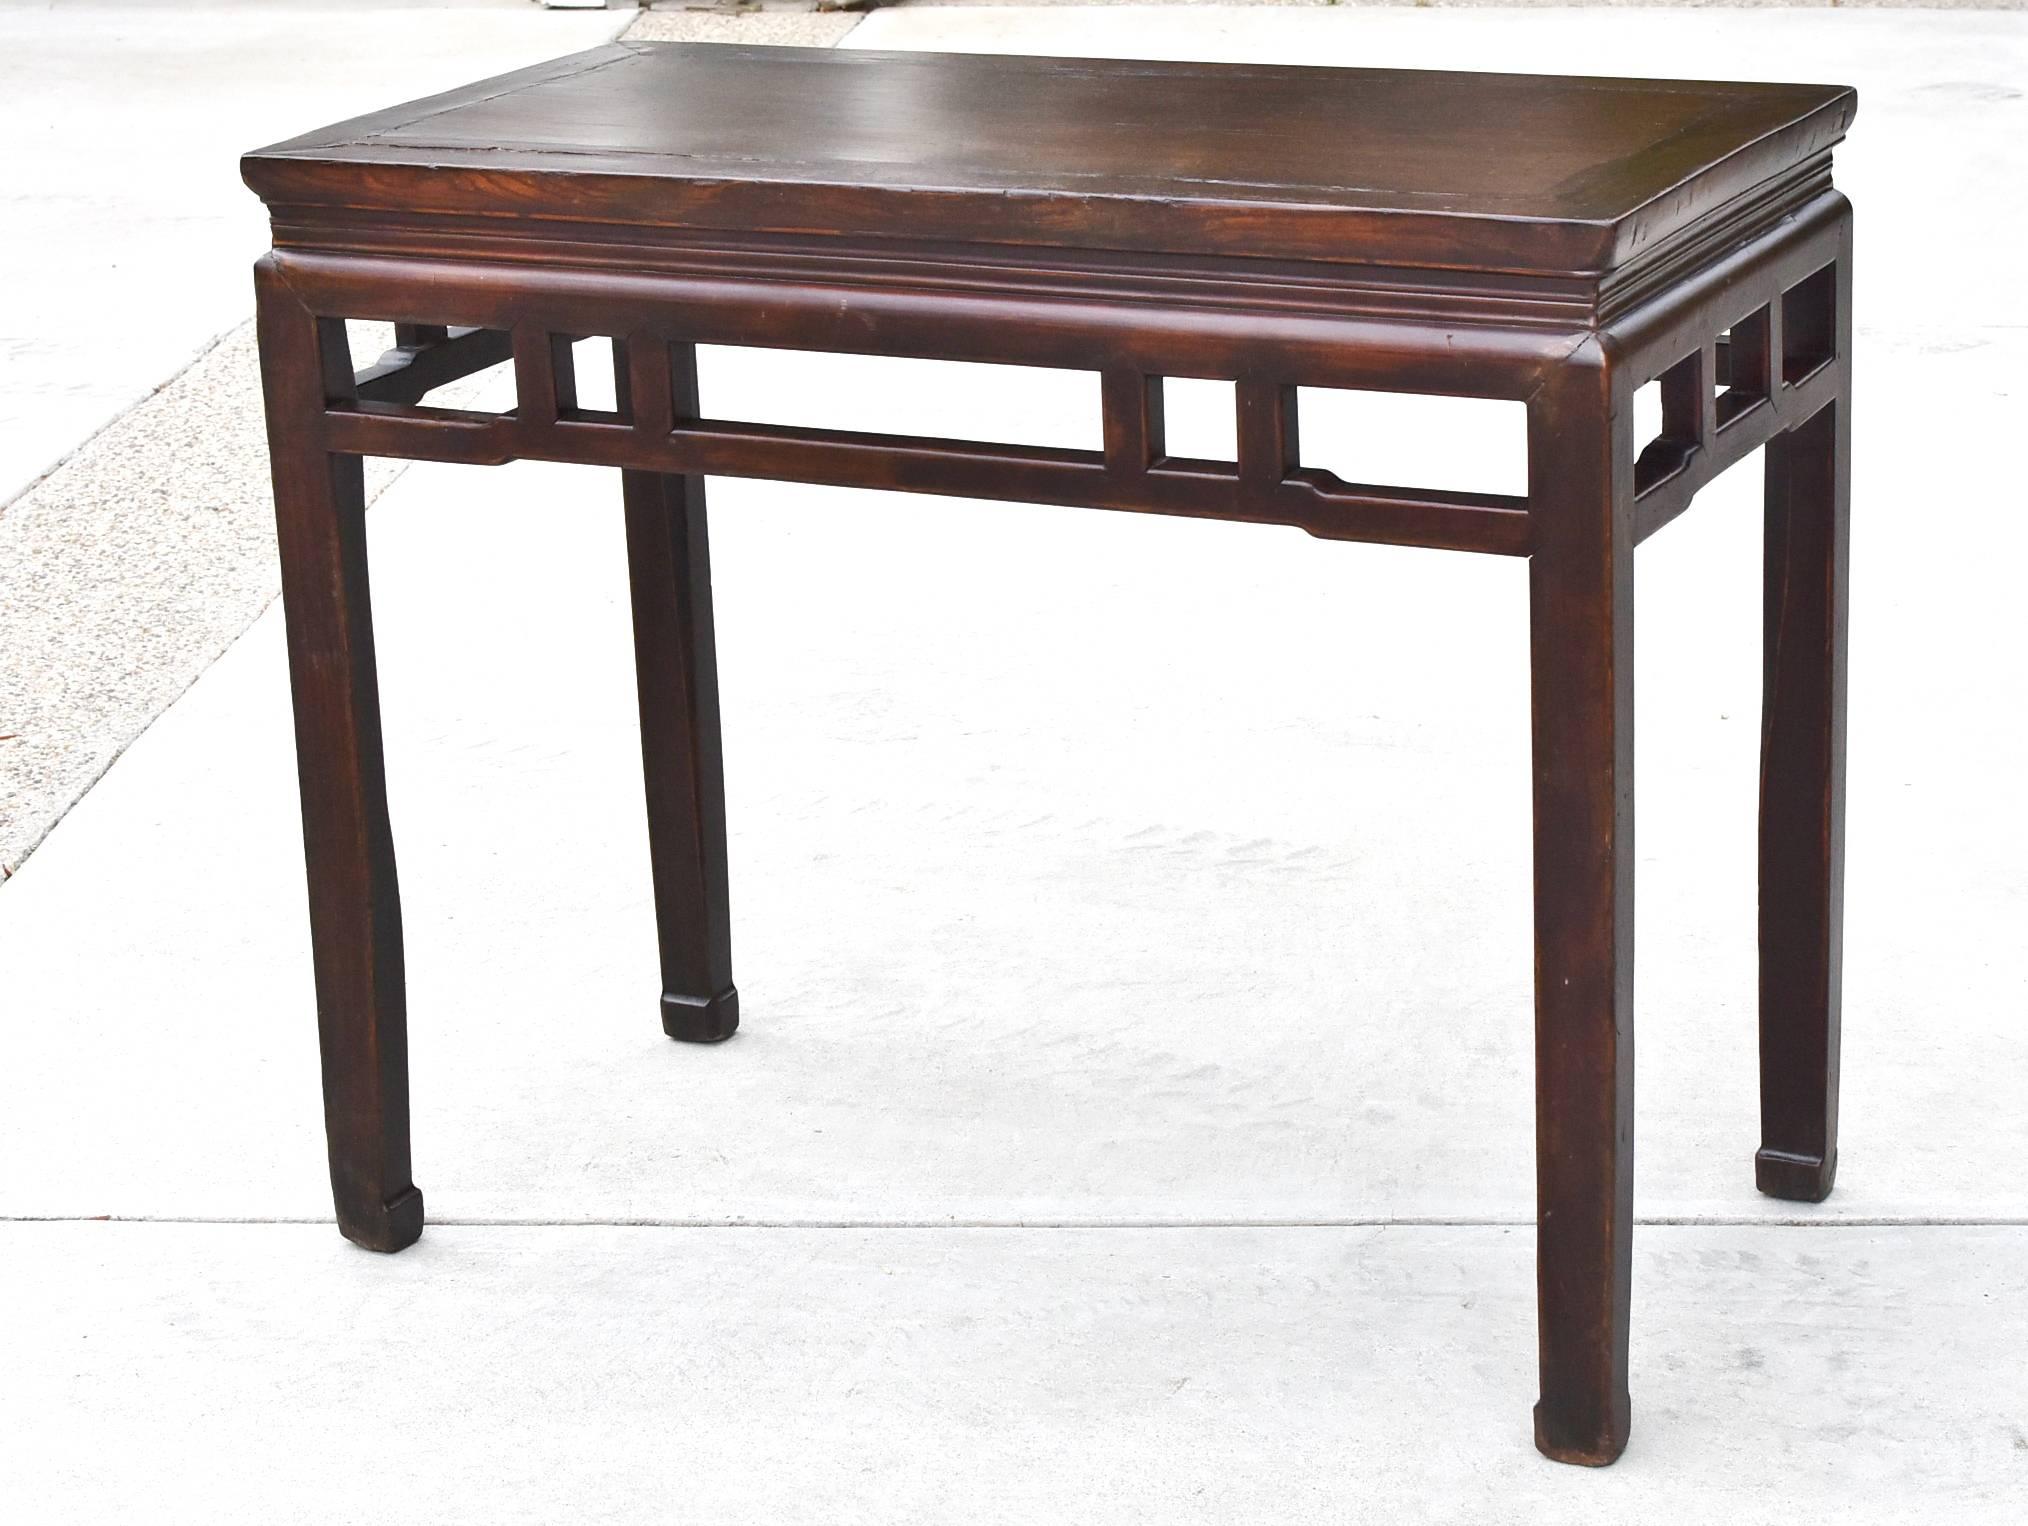 This piece demonstrates all the hallmarks of a Ming dynasty furniture. Choice of beautiful woods and elegant, simple lines make the table timeless. Straight non-fussy stretchers and hoof legs. The table is finished all around and the perfect size to